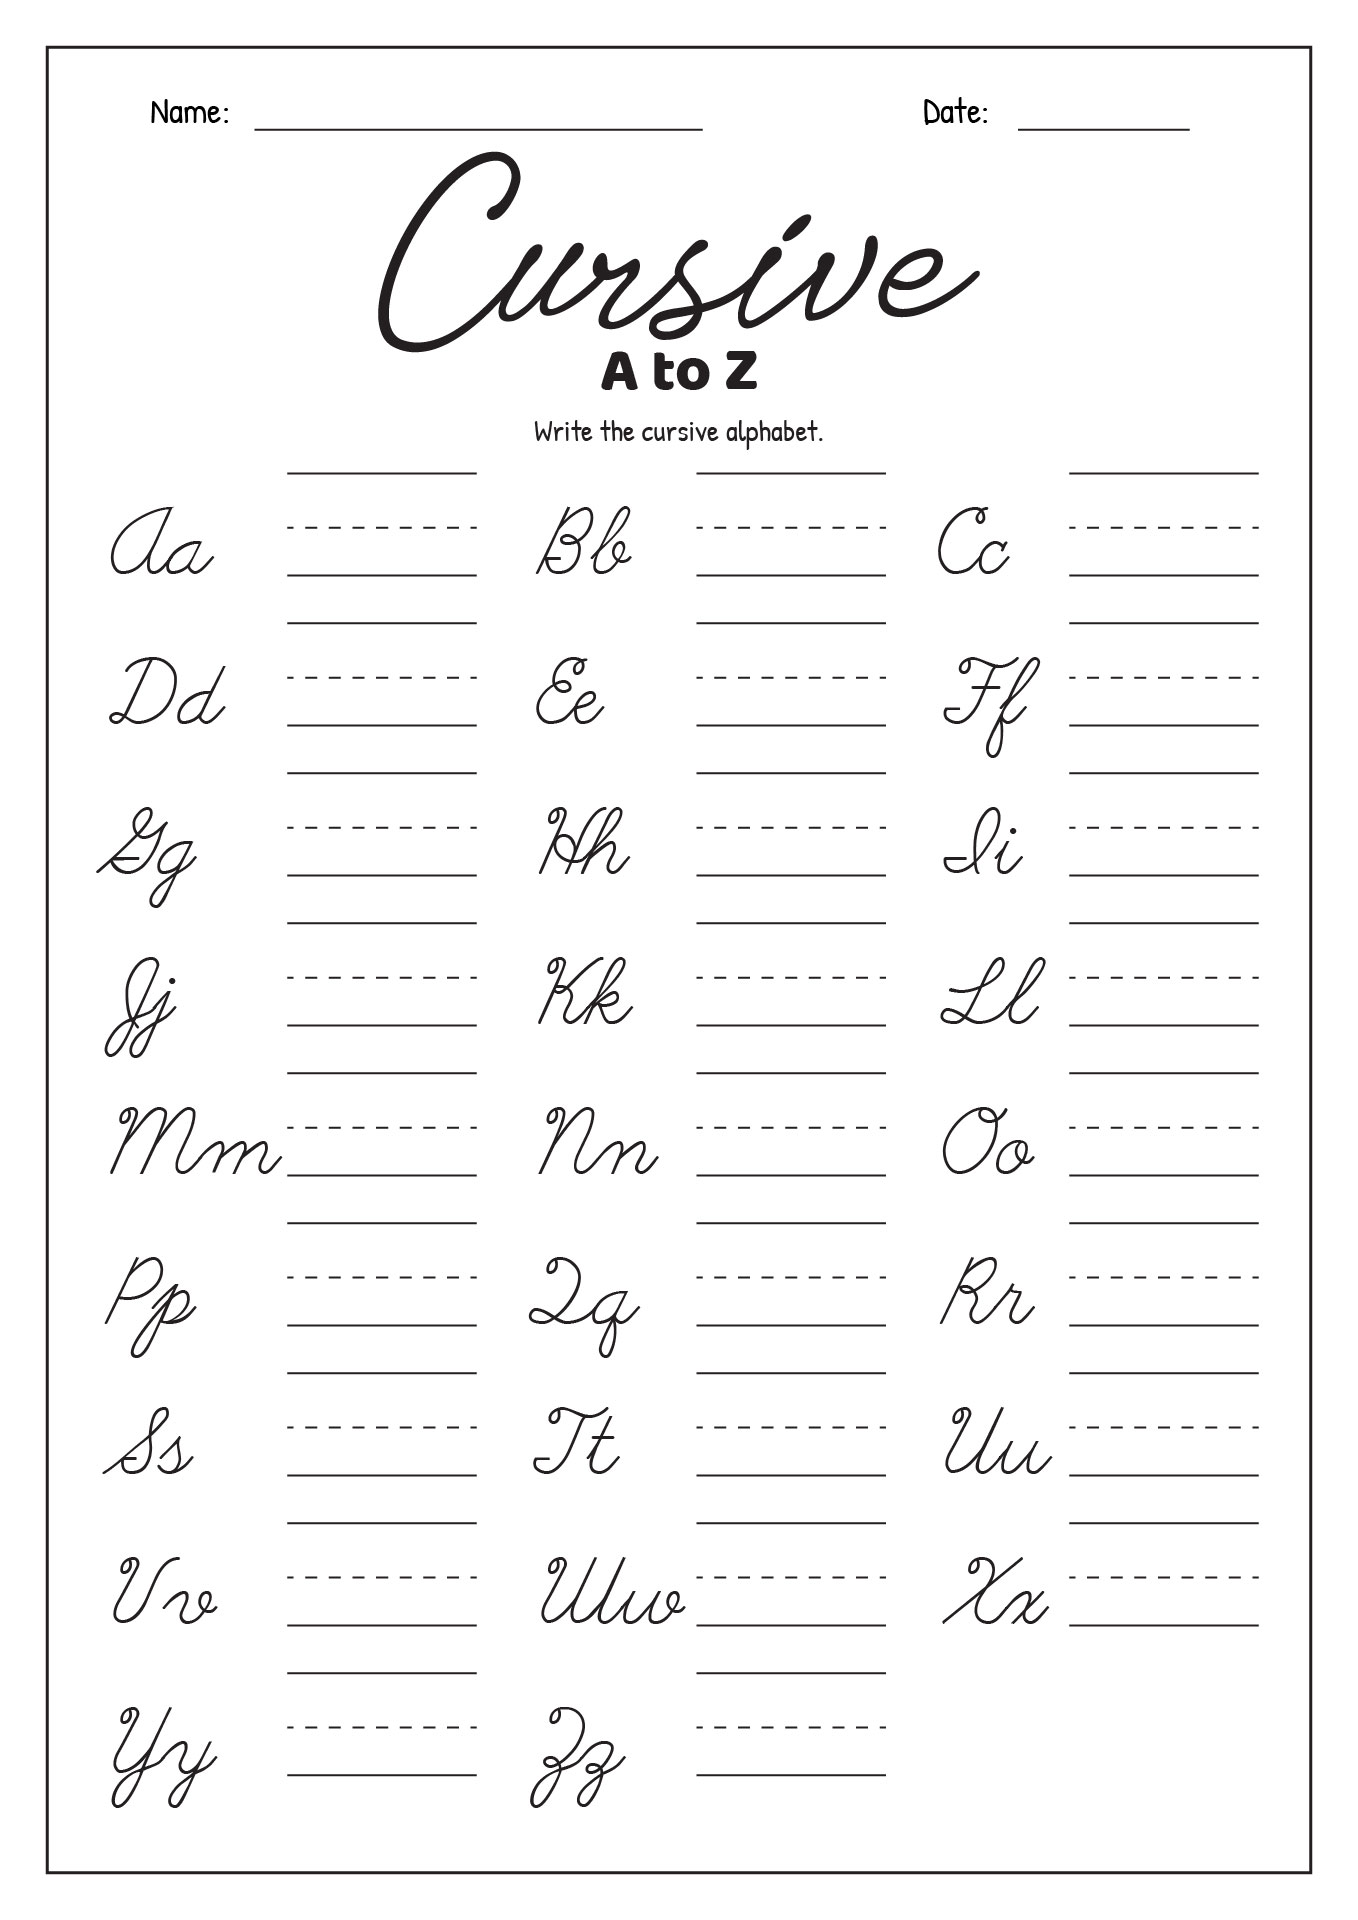 16 Best Images of Cursive Writing Worksheets For 3rd Grade - Free ...